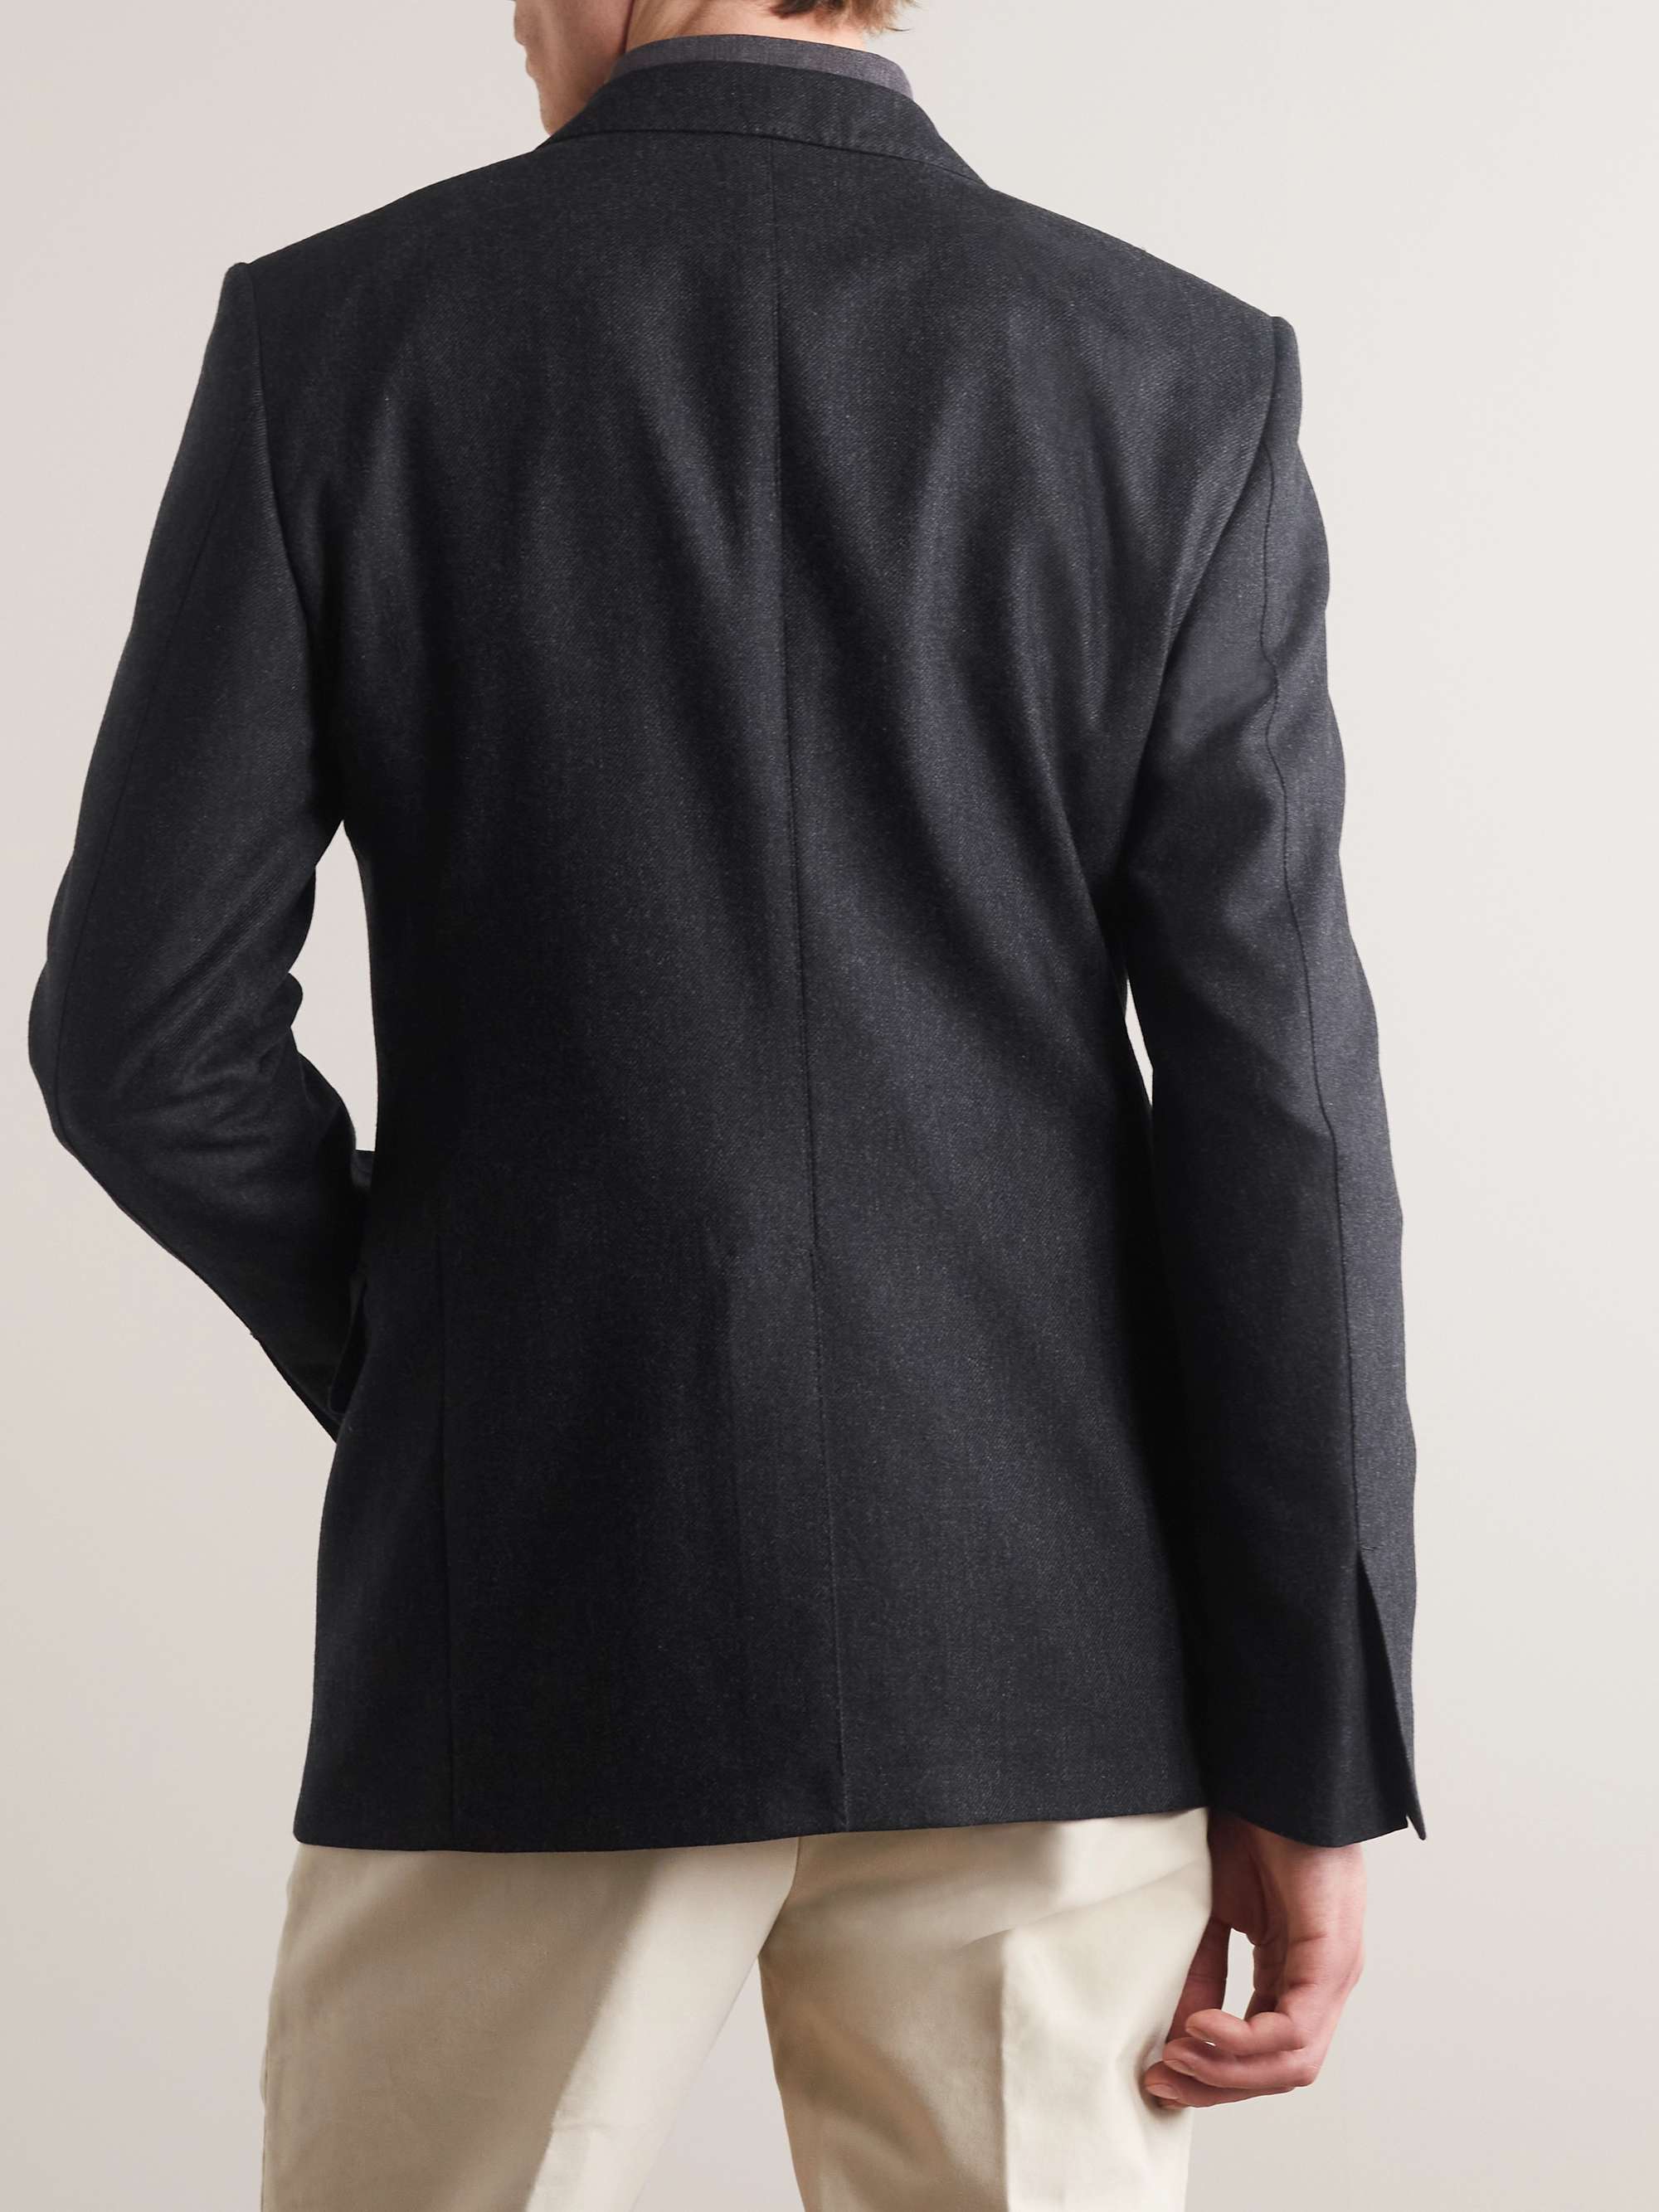 TOM FORD Shelton Slim-Fit Wool and Cashmere-Blend Twill Blazer